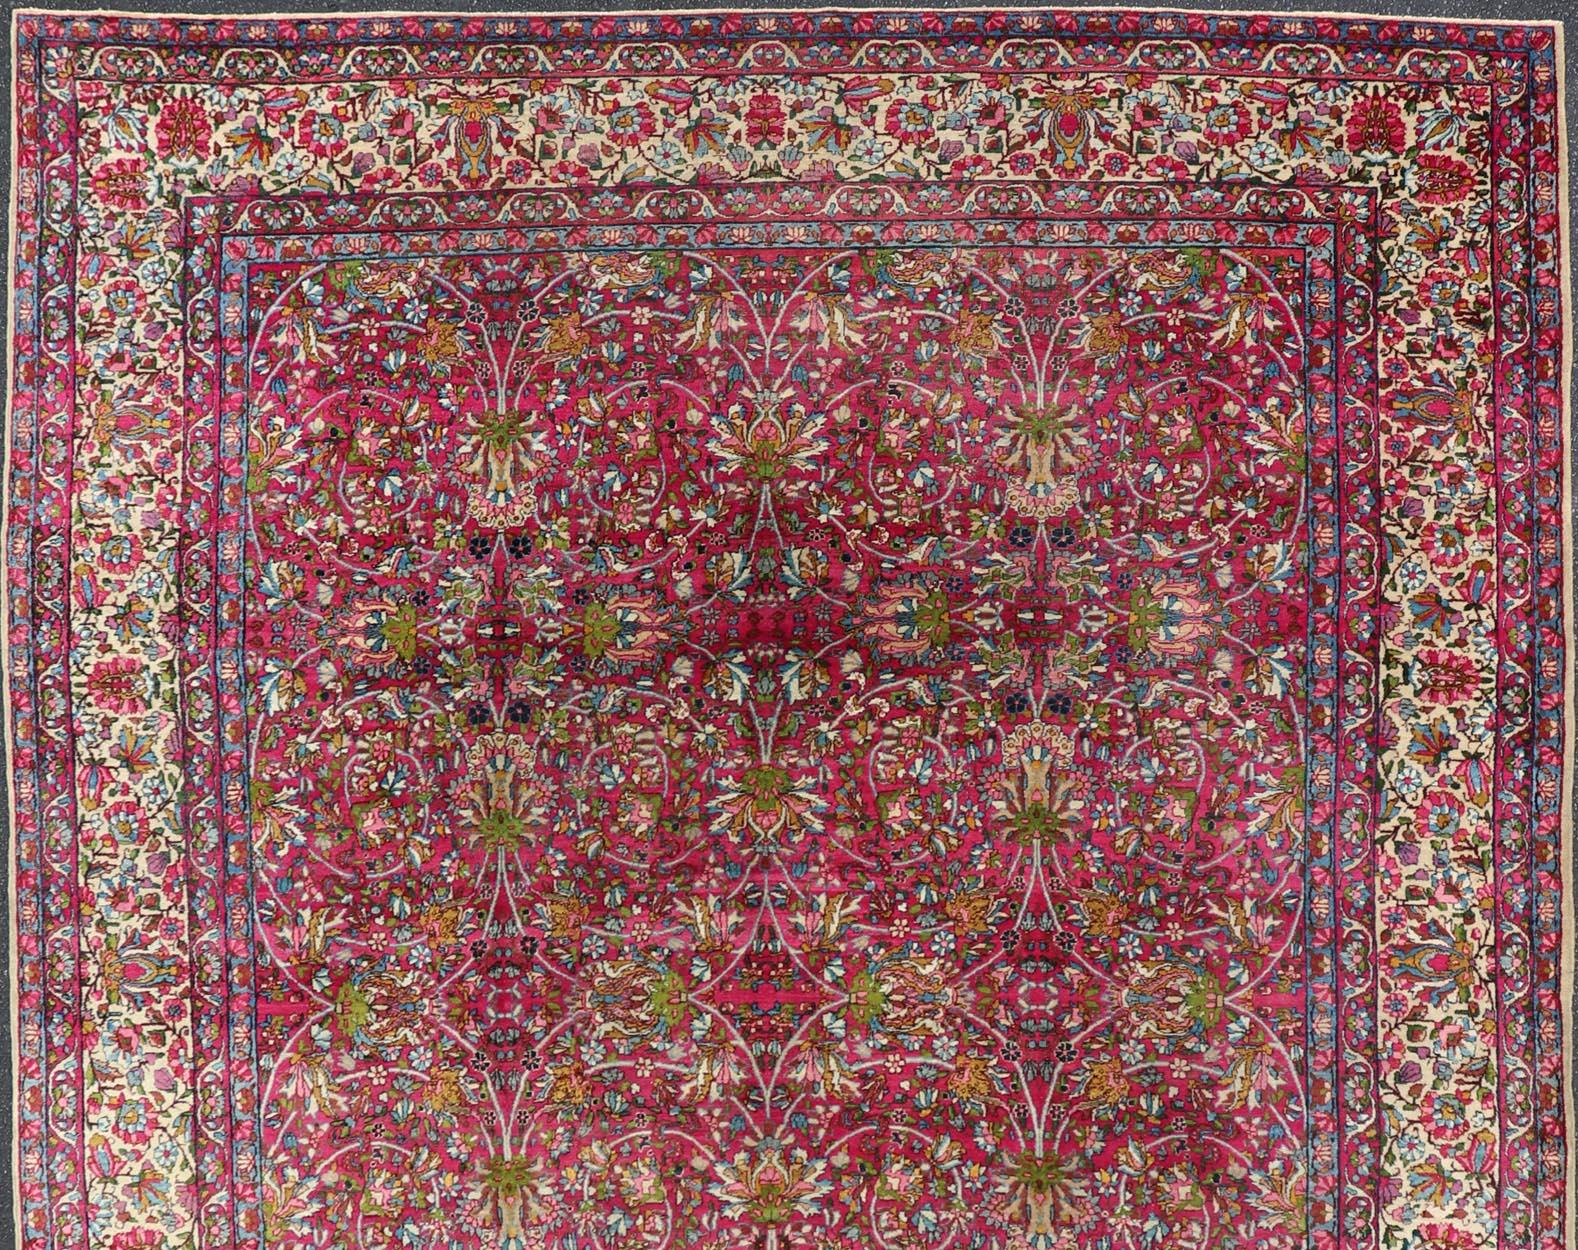 Wool  Antique Persian Lavar Kerman Rug with All-Over Floral Design In Jewel Tones  For Sale